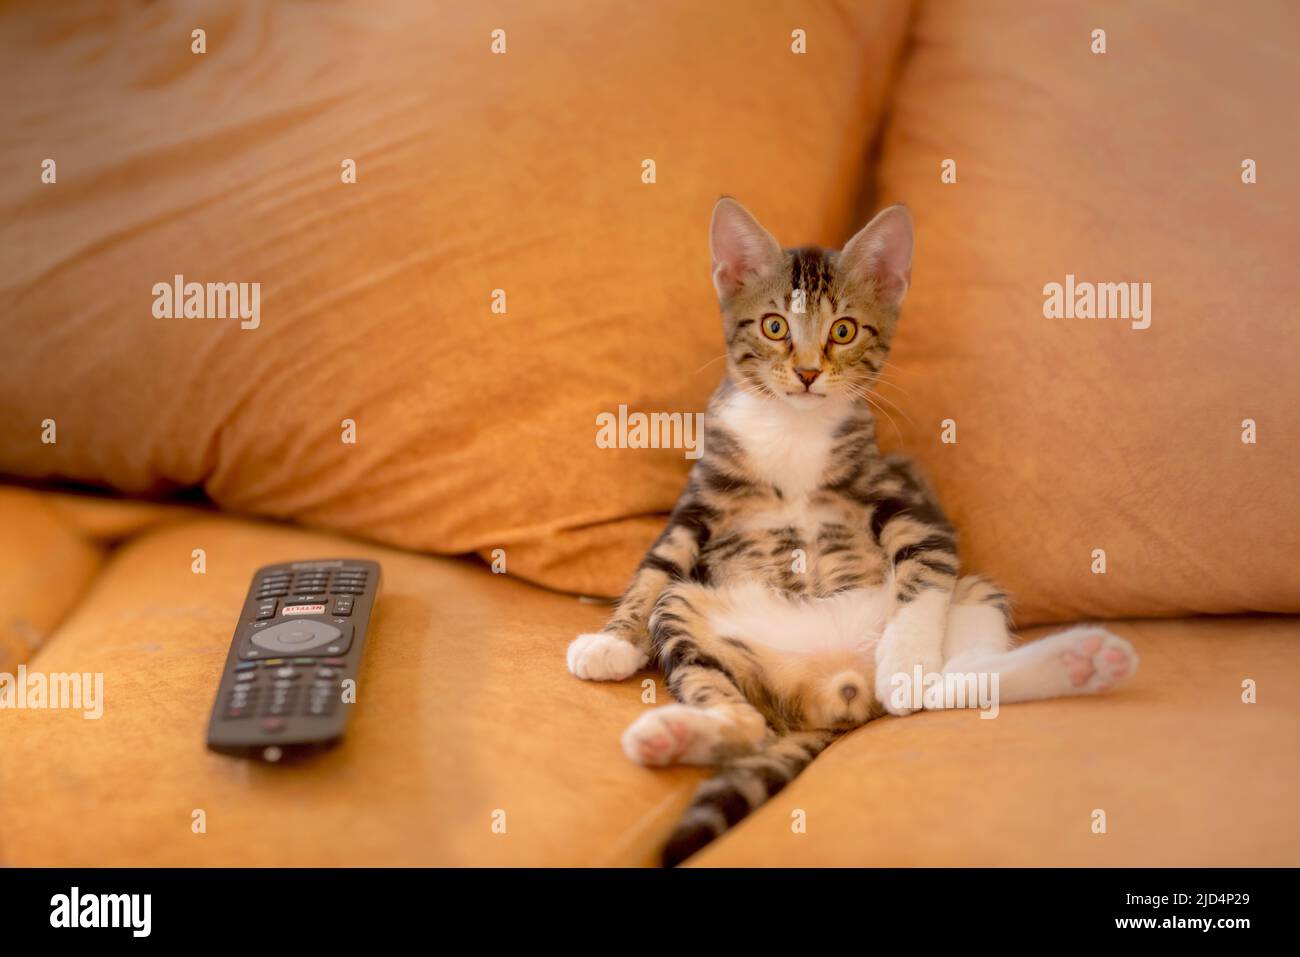 Funny kitten sitting up like human next to a remote controller, looking as if watching tv Stock Photo